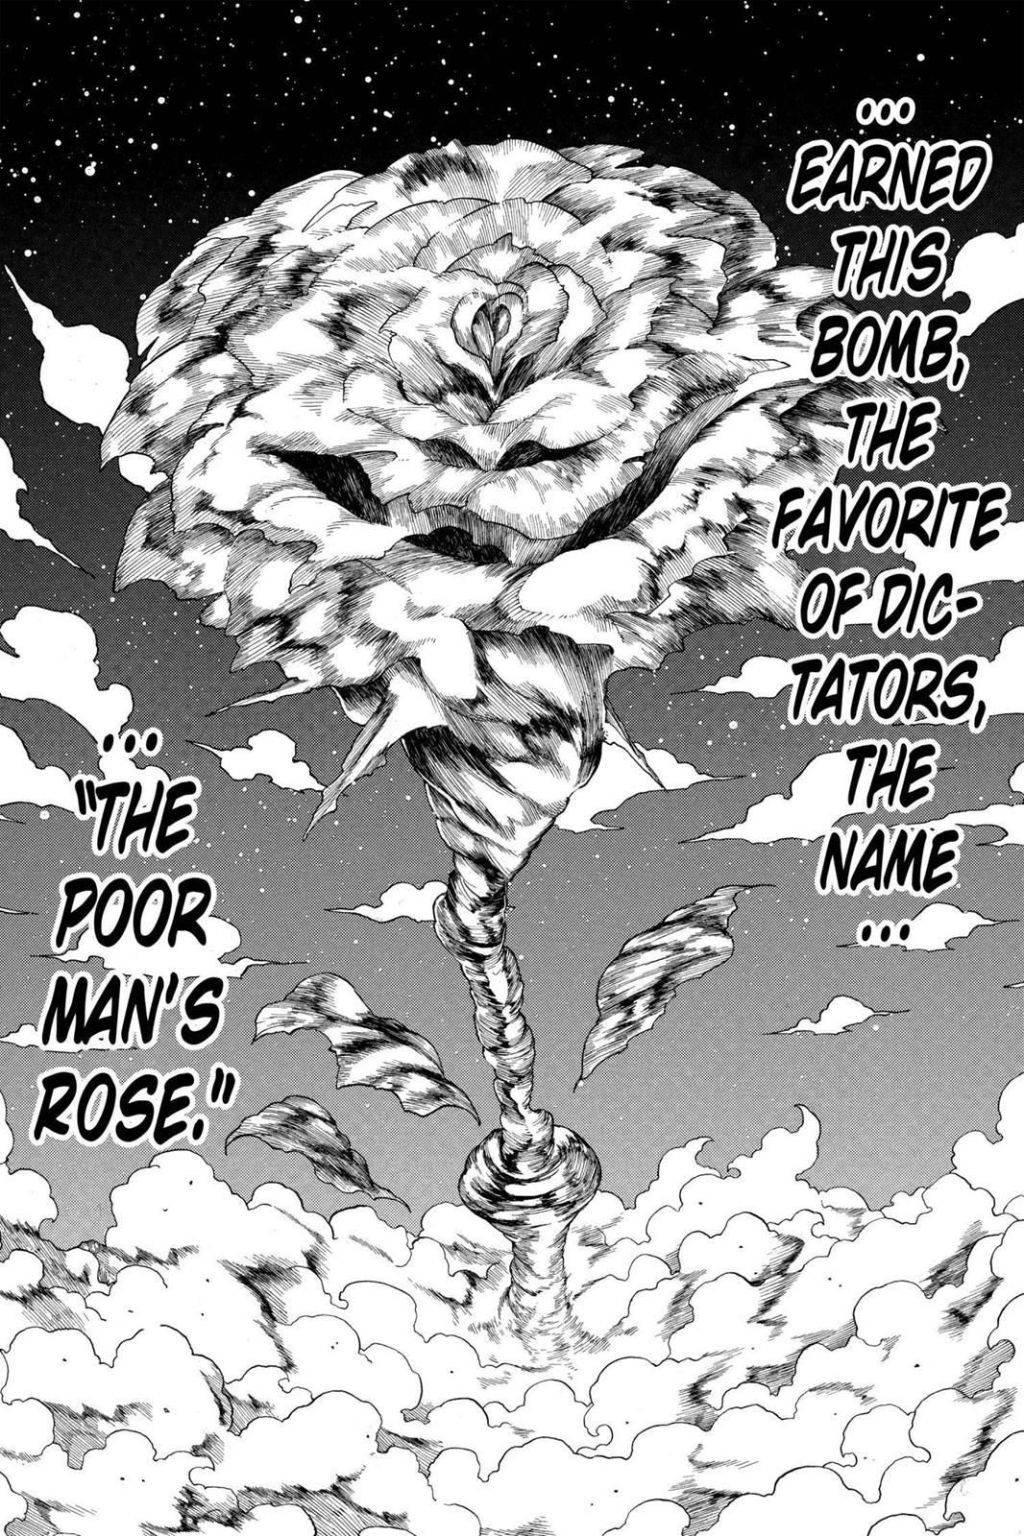 YOSHIHIRO TOGASHI’S “POOR-MAN’S ROSE”- WHY I LOVE THIS NAME FOR A NUCLEAR WEAPON (HUNTERXHUNTER)